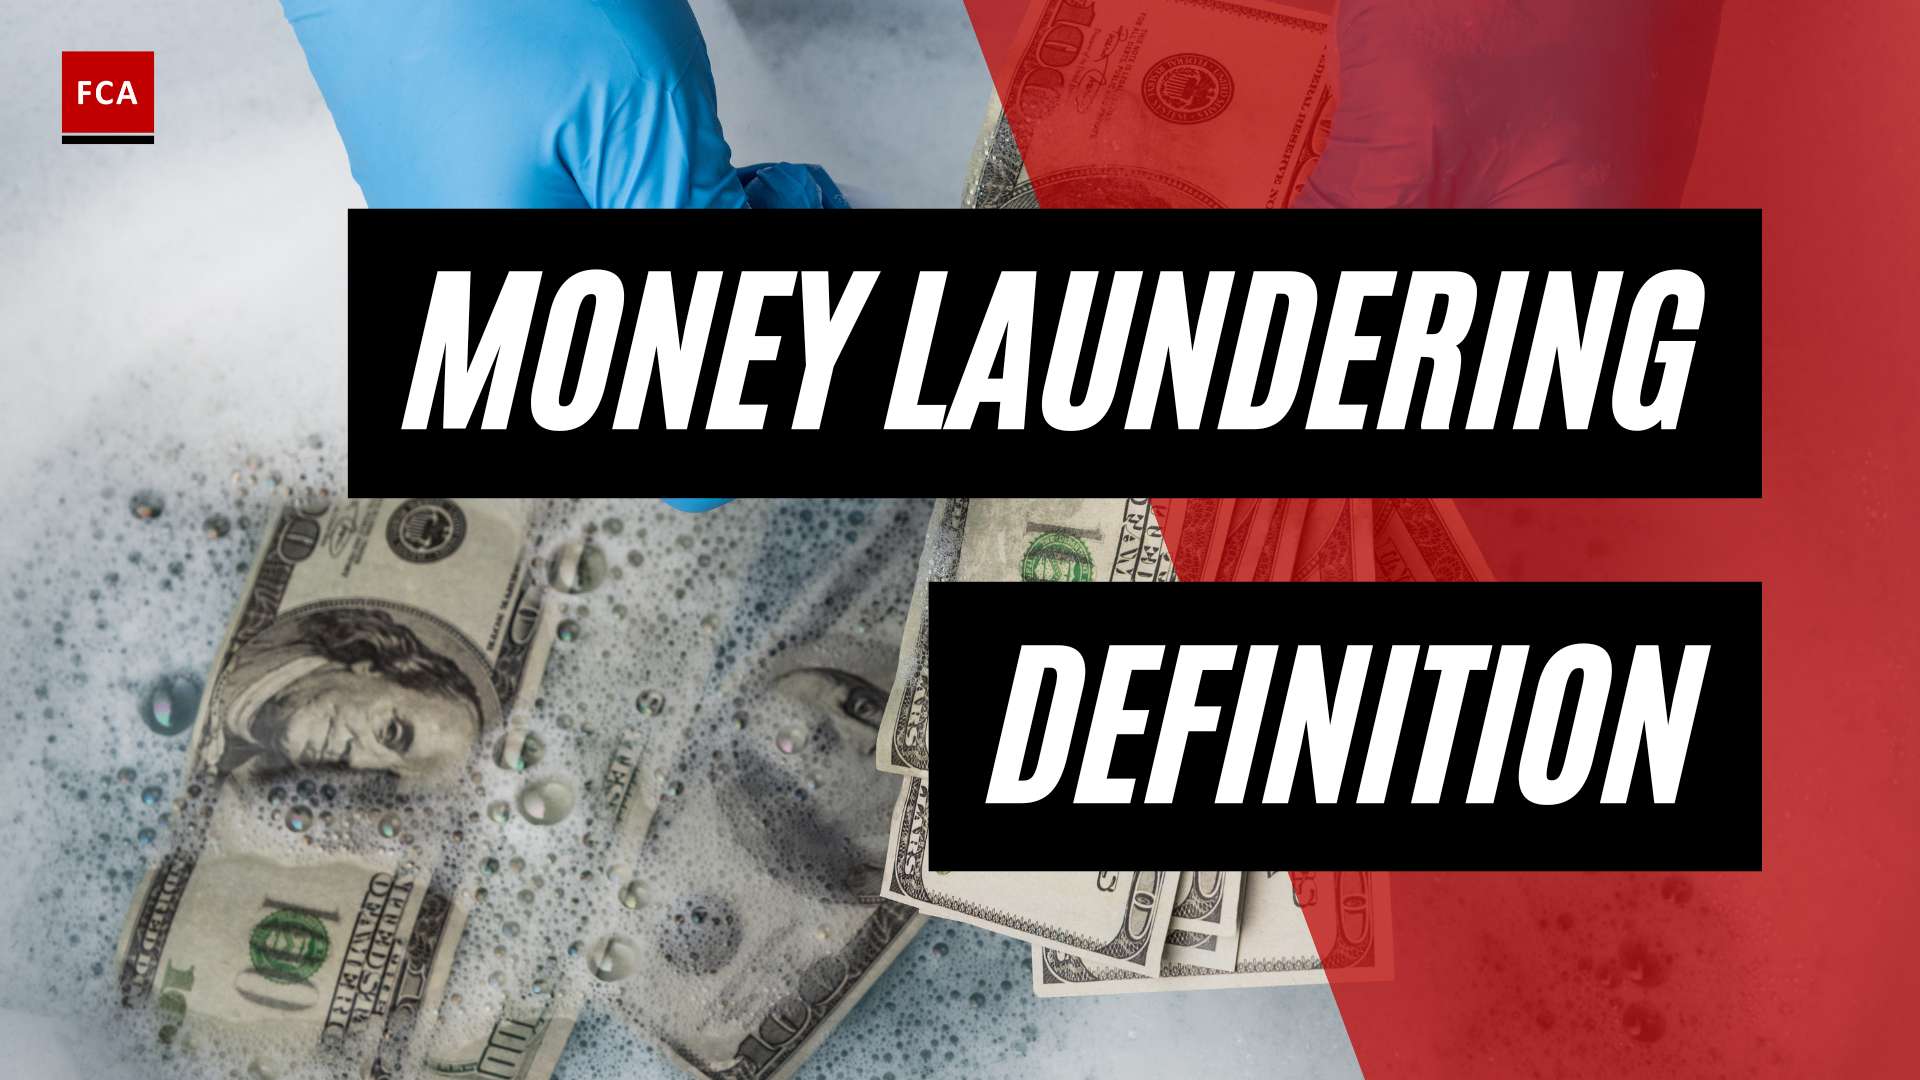 The Art Of Deception: Unraveling The Complex Money Laundering Definition